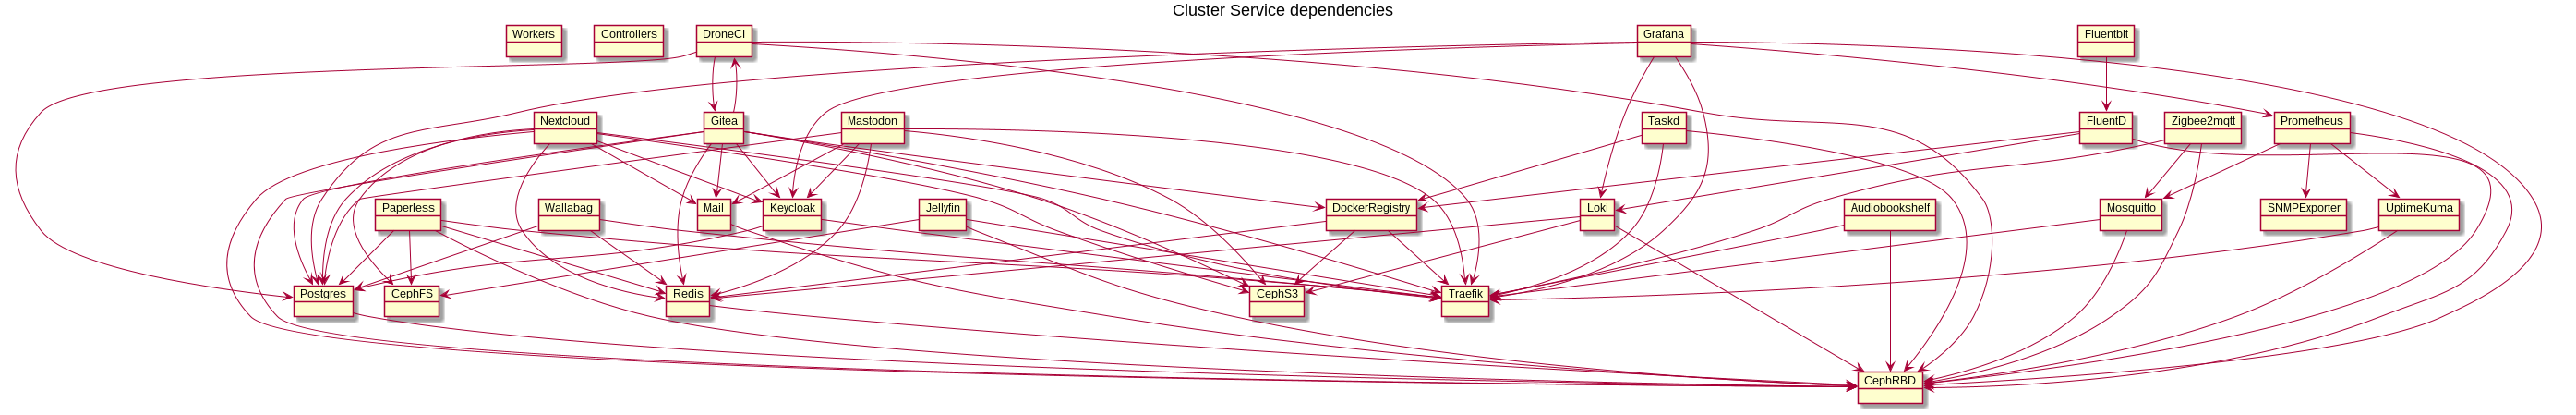 A dependency diagram of the services in my Homelab. It shows 27 different services, ranging from Audiobookshelf to zigbee2mqtt. The largest number of connections go into Traefik, my Ingress proxy, and into CephRBD, which provides storage for services. There are two clusters. On the one side is Prometheus, with dependencies onto a number of smaller services like Mosquitto for MQTT or UptimeKuma for monitoring and service availability. On the other side is a service clustered around Postgres and Redis. Here are the heavier services, like Mastodon, Wallabag, Keycloak, Jellyfin and so forth.